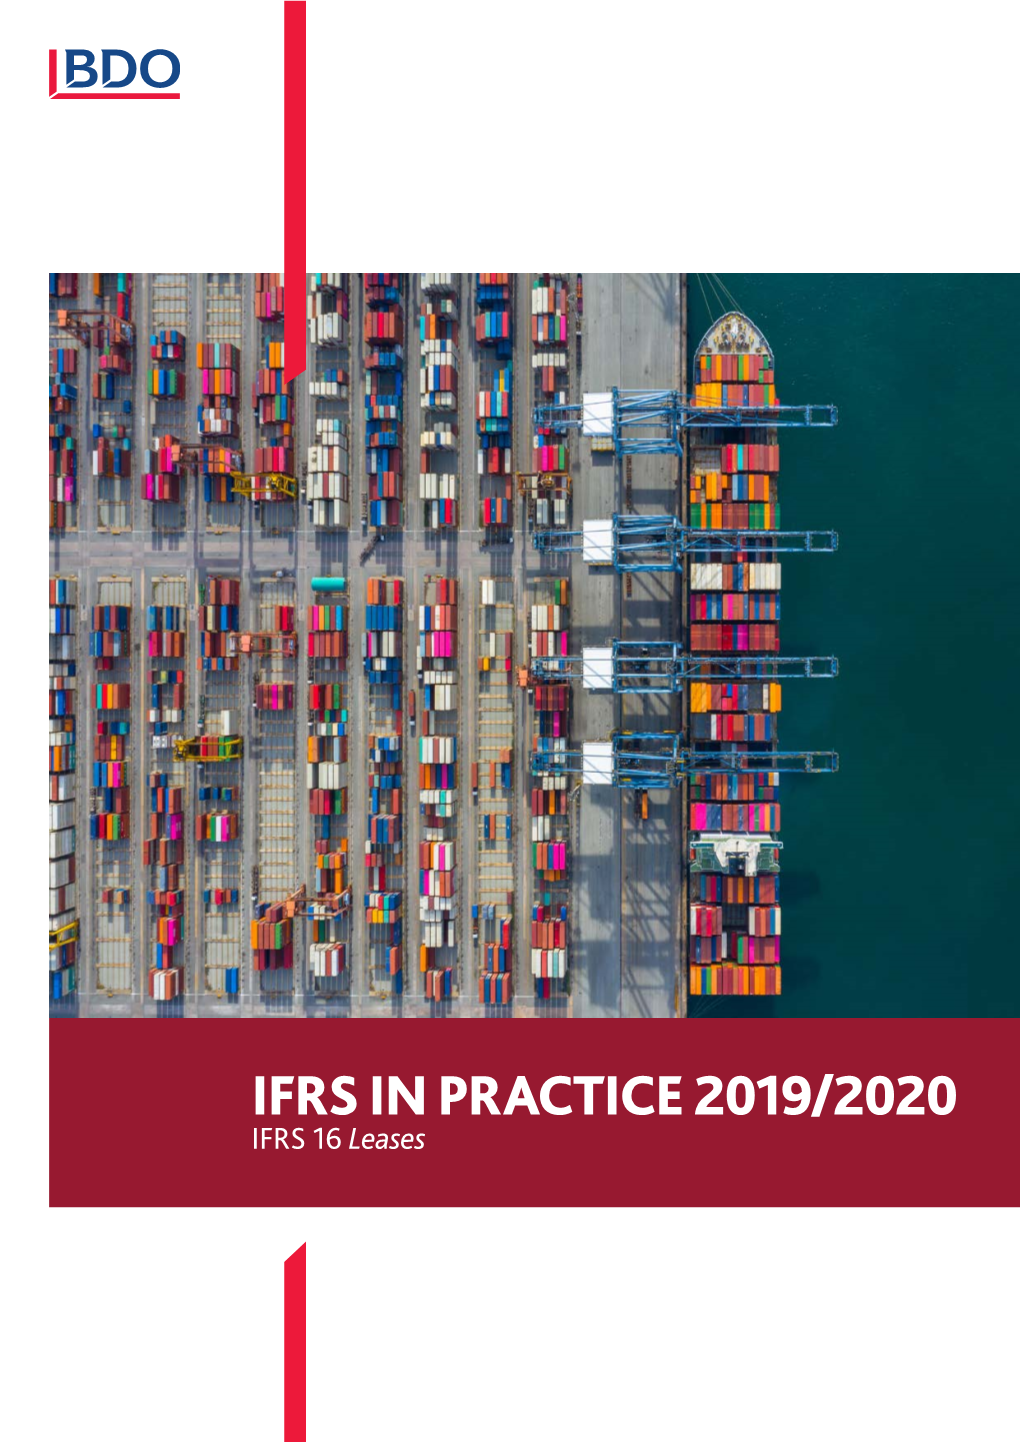 IFRS in PRACTICE 2019 / IFRS 16 Leases